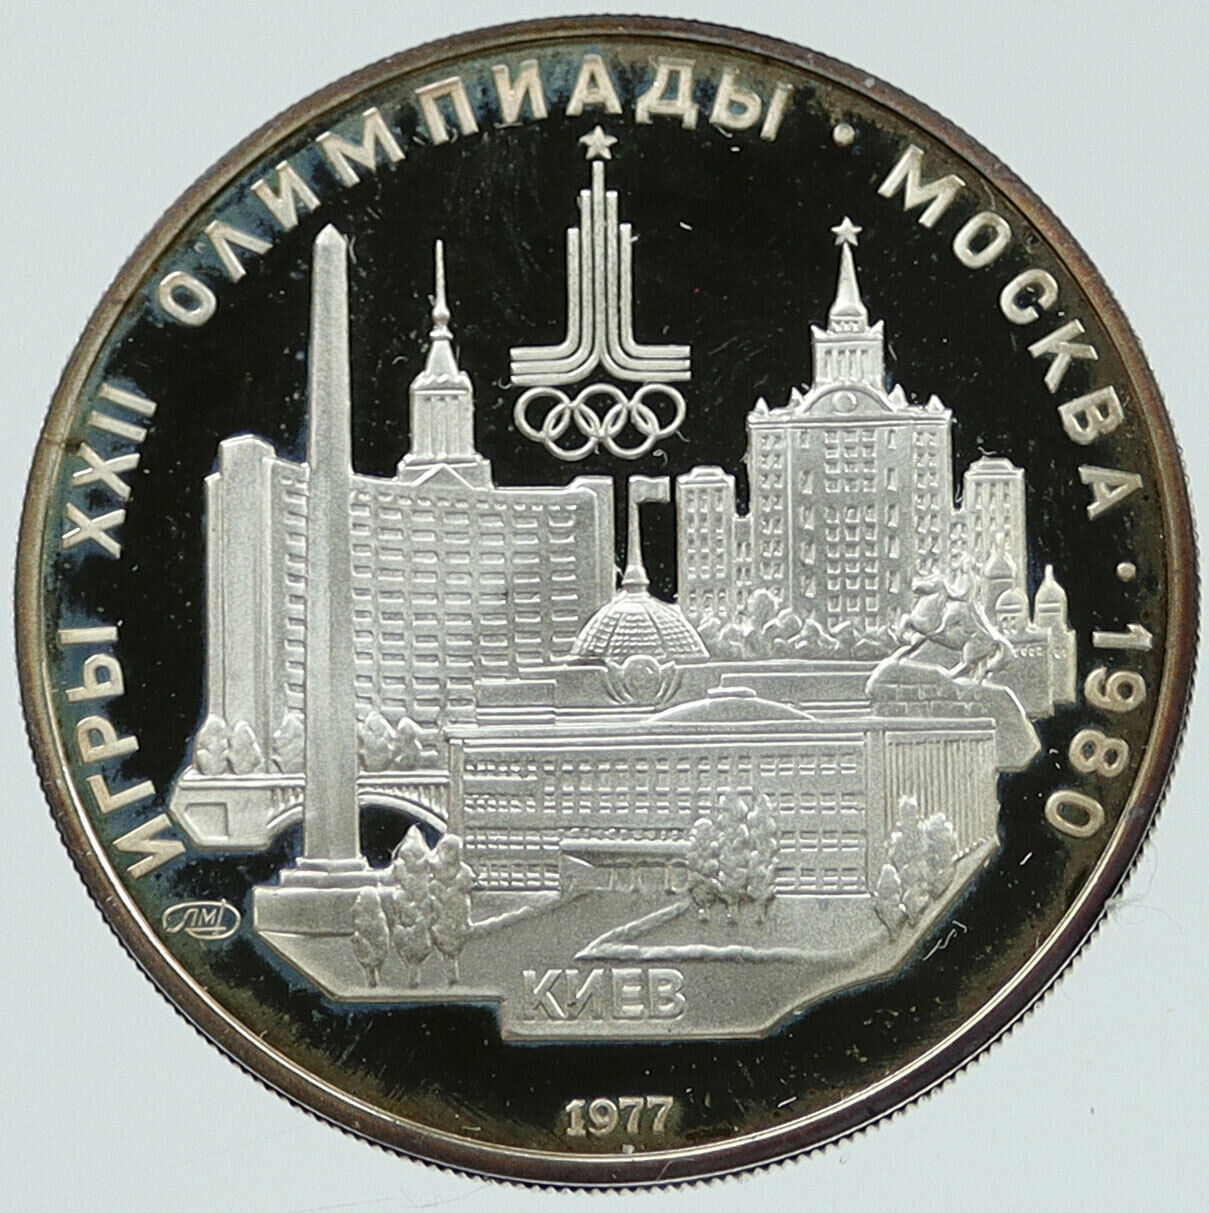 1977 MOSCOW 1980 Russia Olympics VINTAGE KIEV CITY Proof Silver 5 R Coin i116738